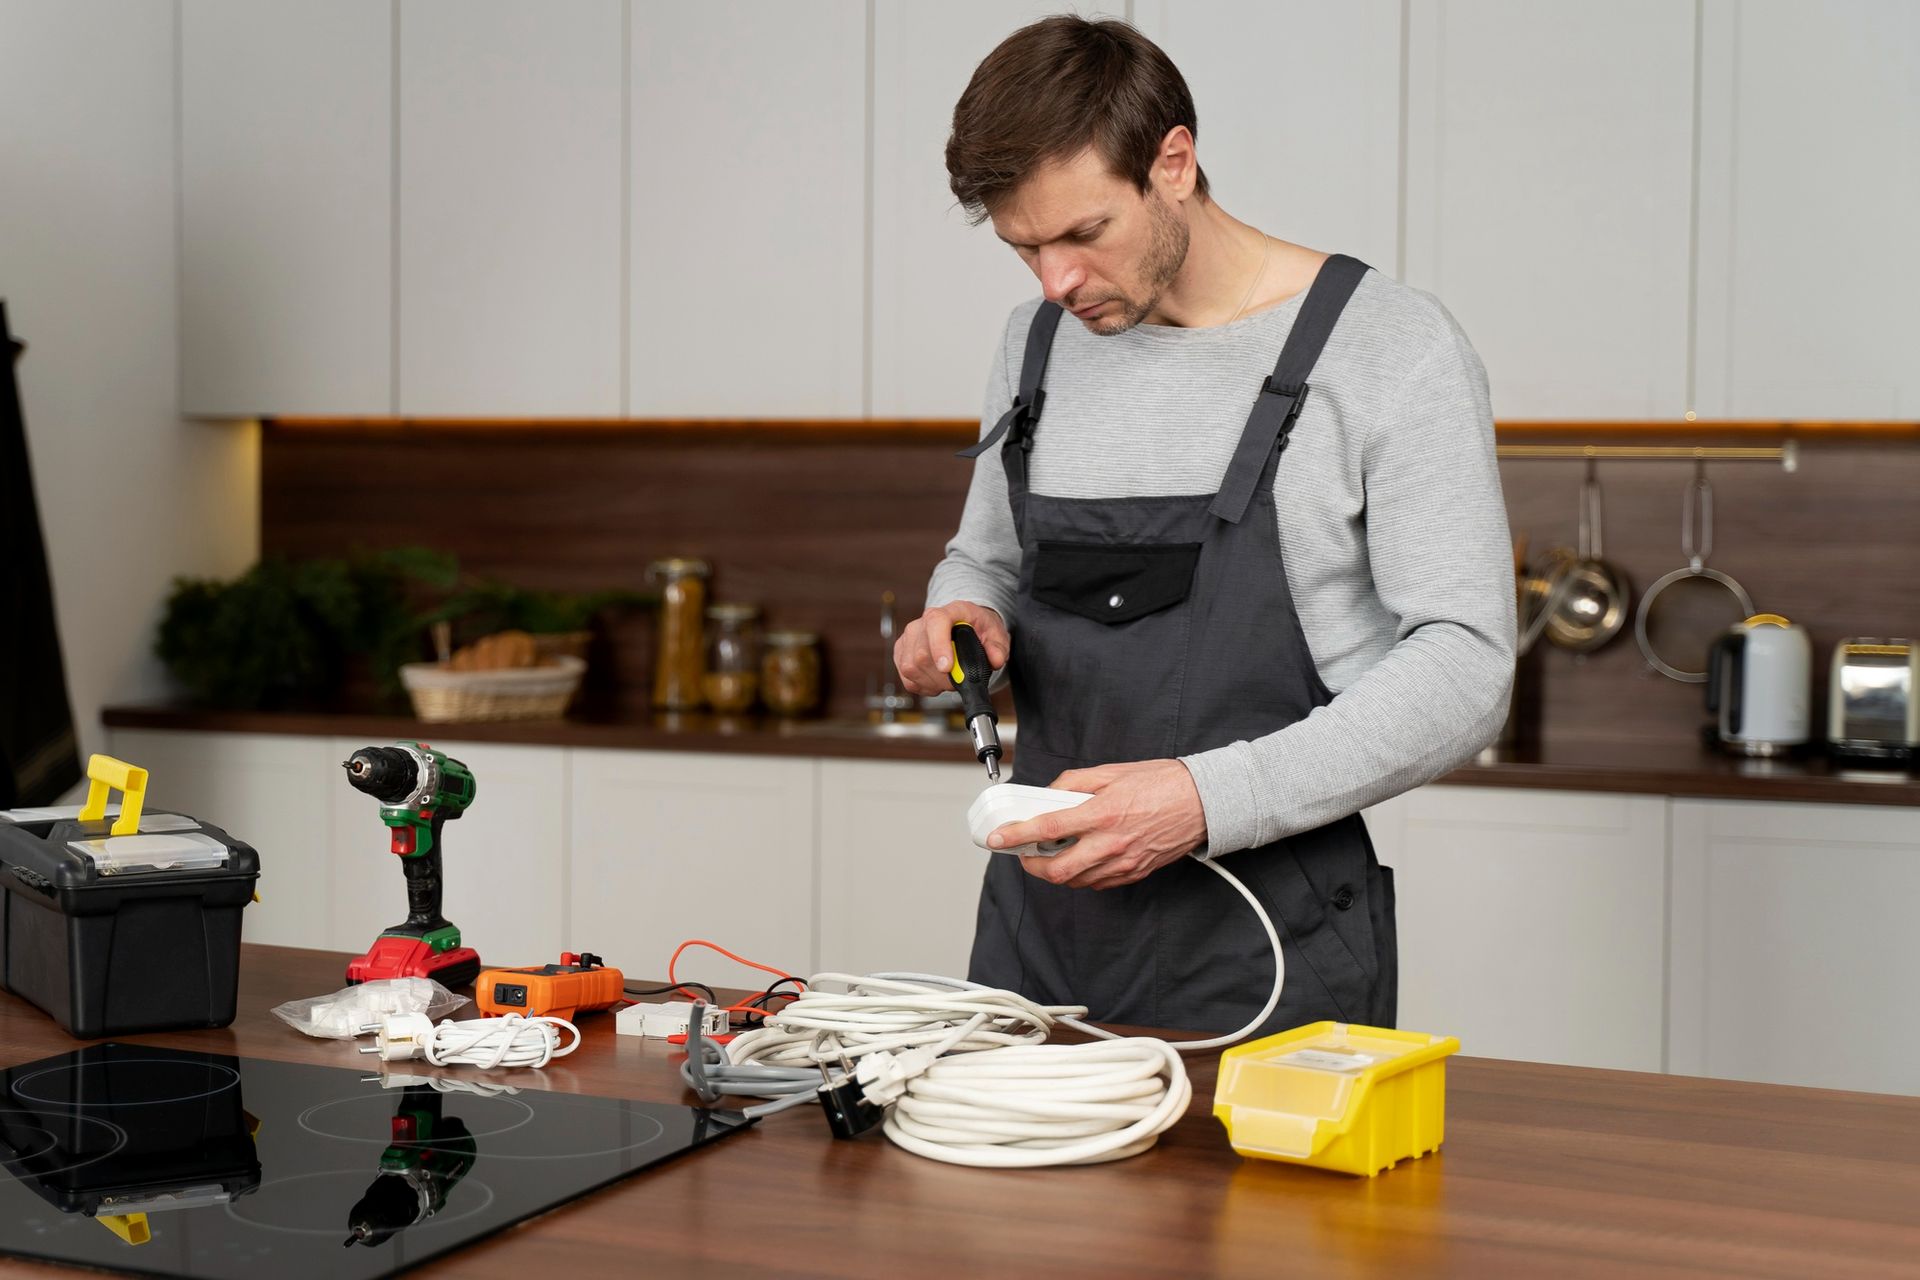 a man is working on an electric stove in a kitchen .